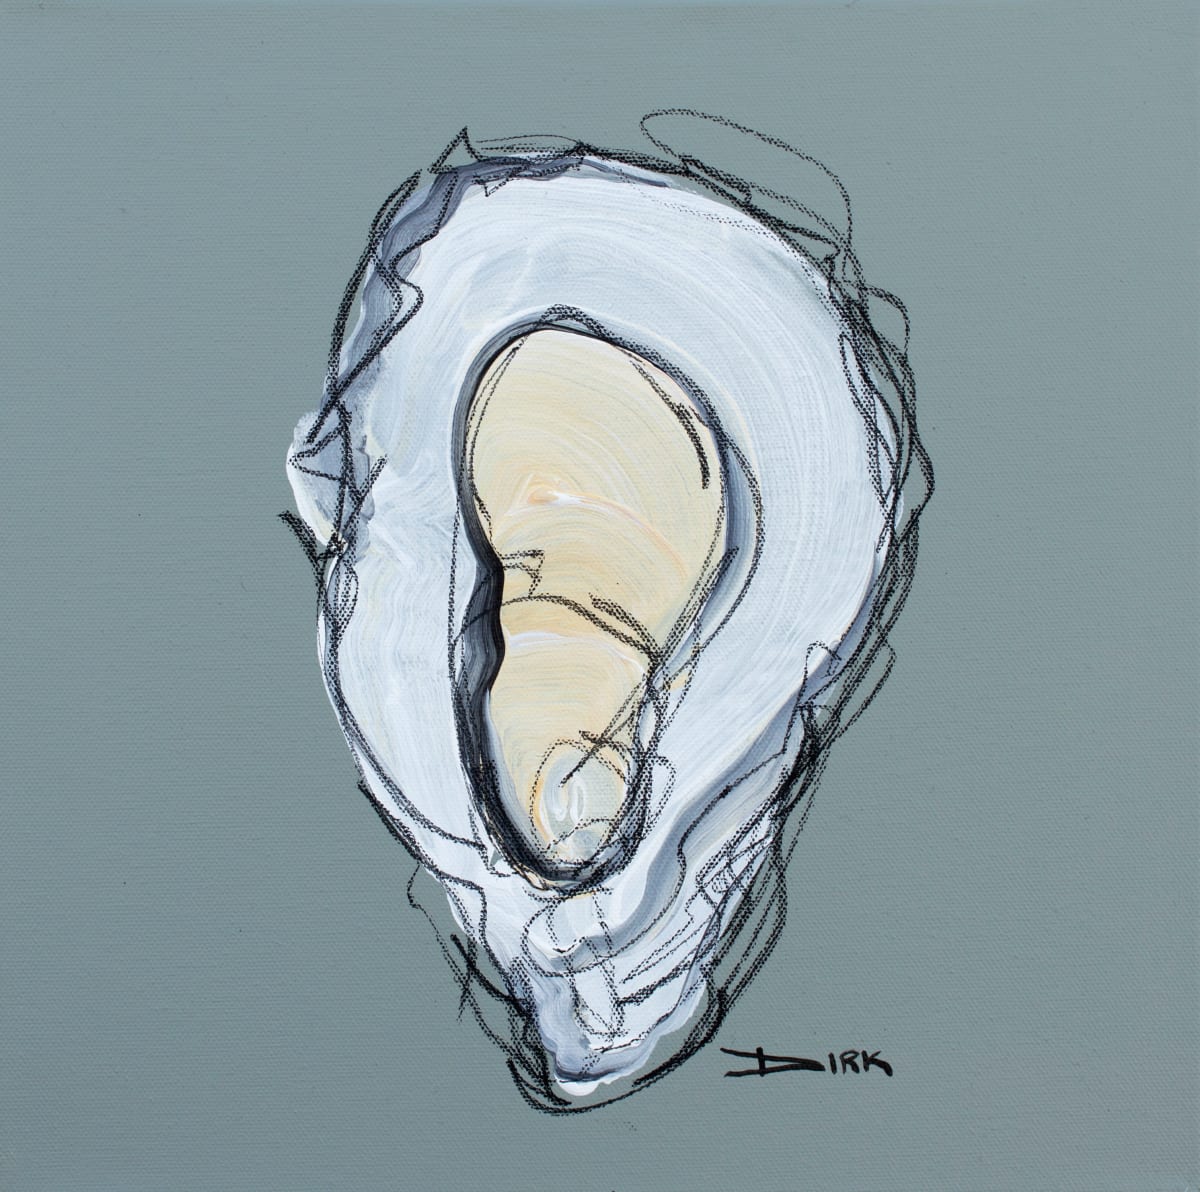 Oyster on canvas #3 by Dirk Guidry 